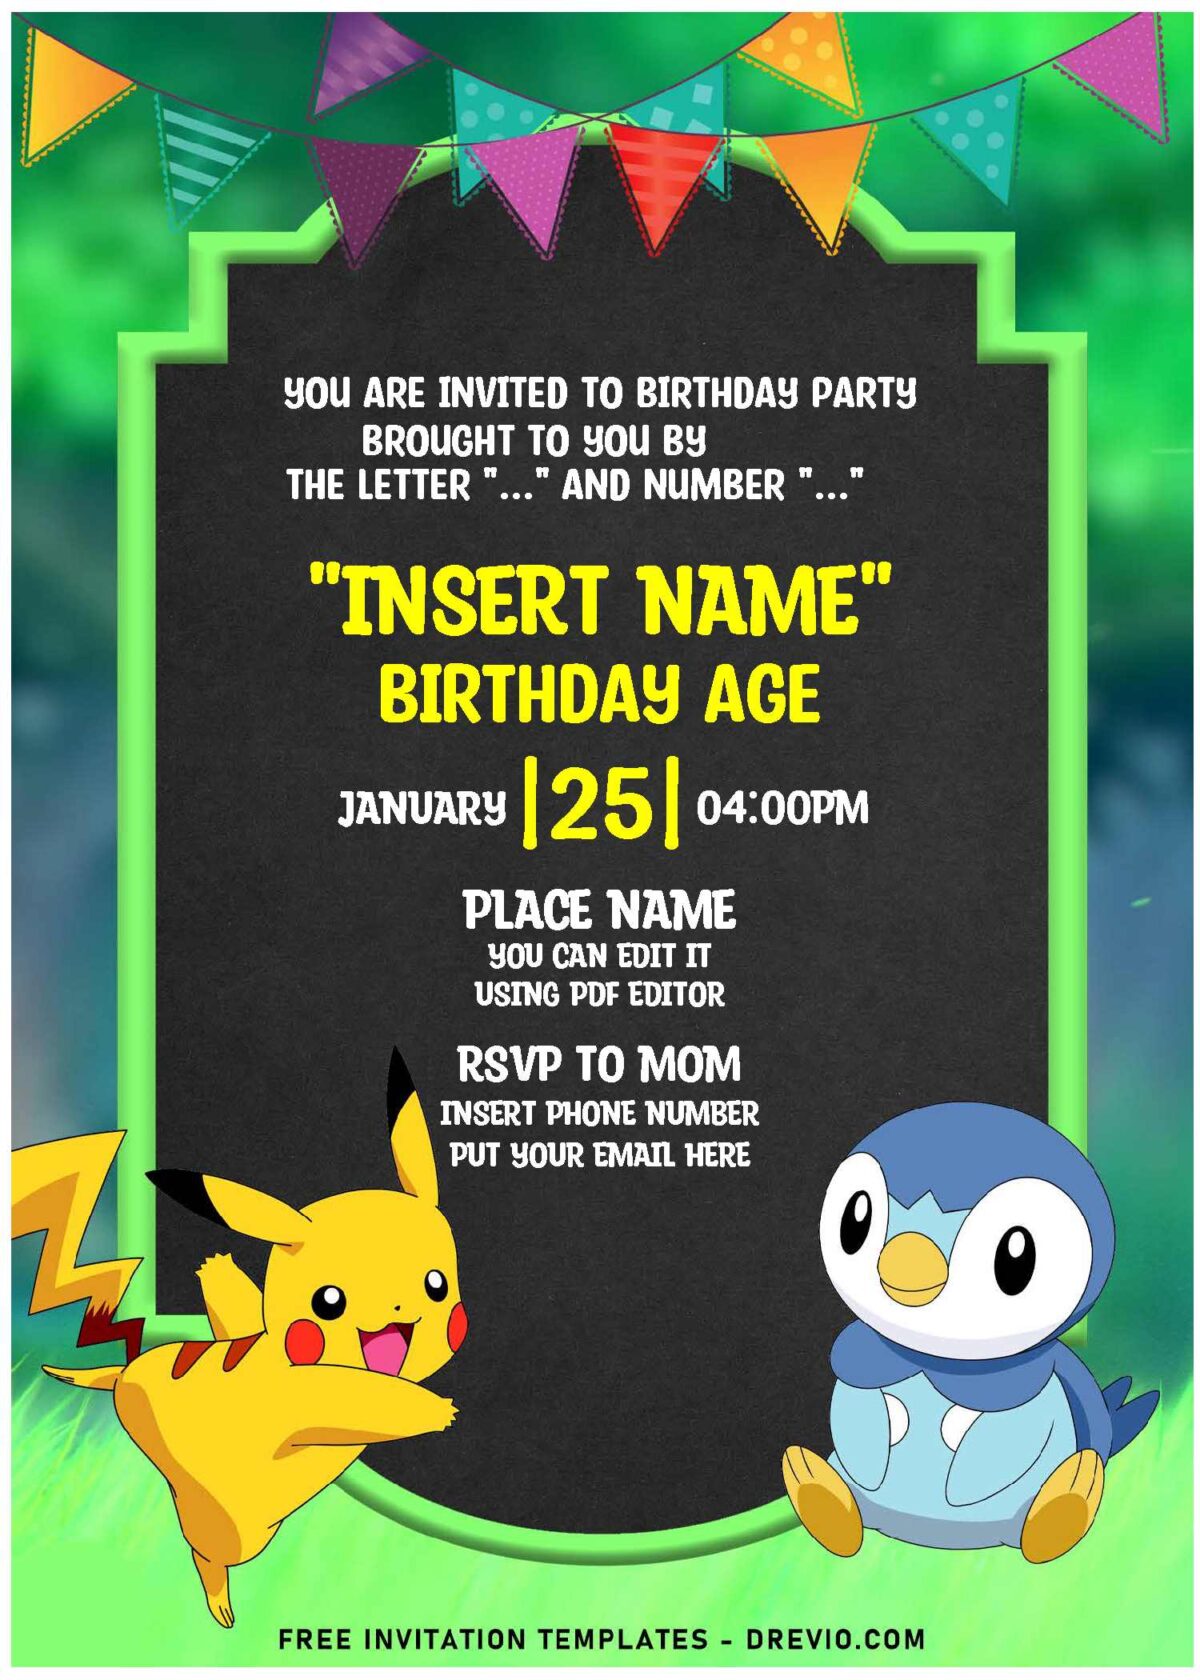 (Free Editable PDF) Hilarious Pikachu And Friends Pokémon Birthday Invitation Templates with colorful text